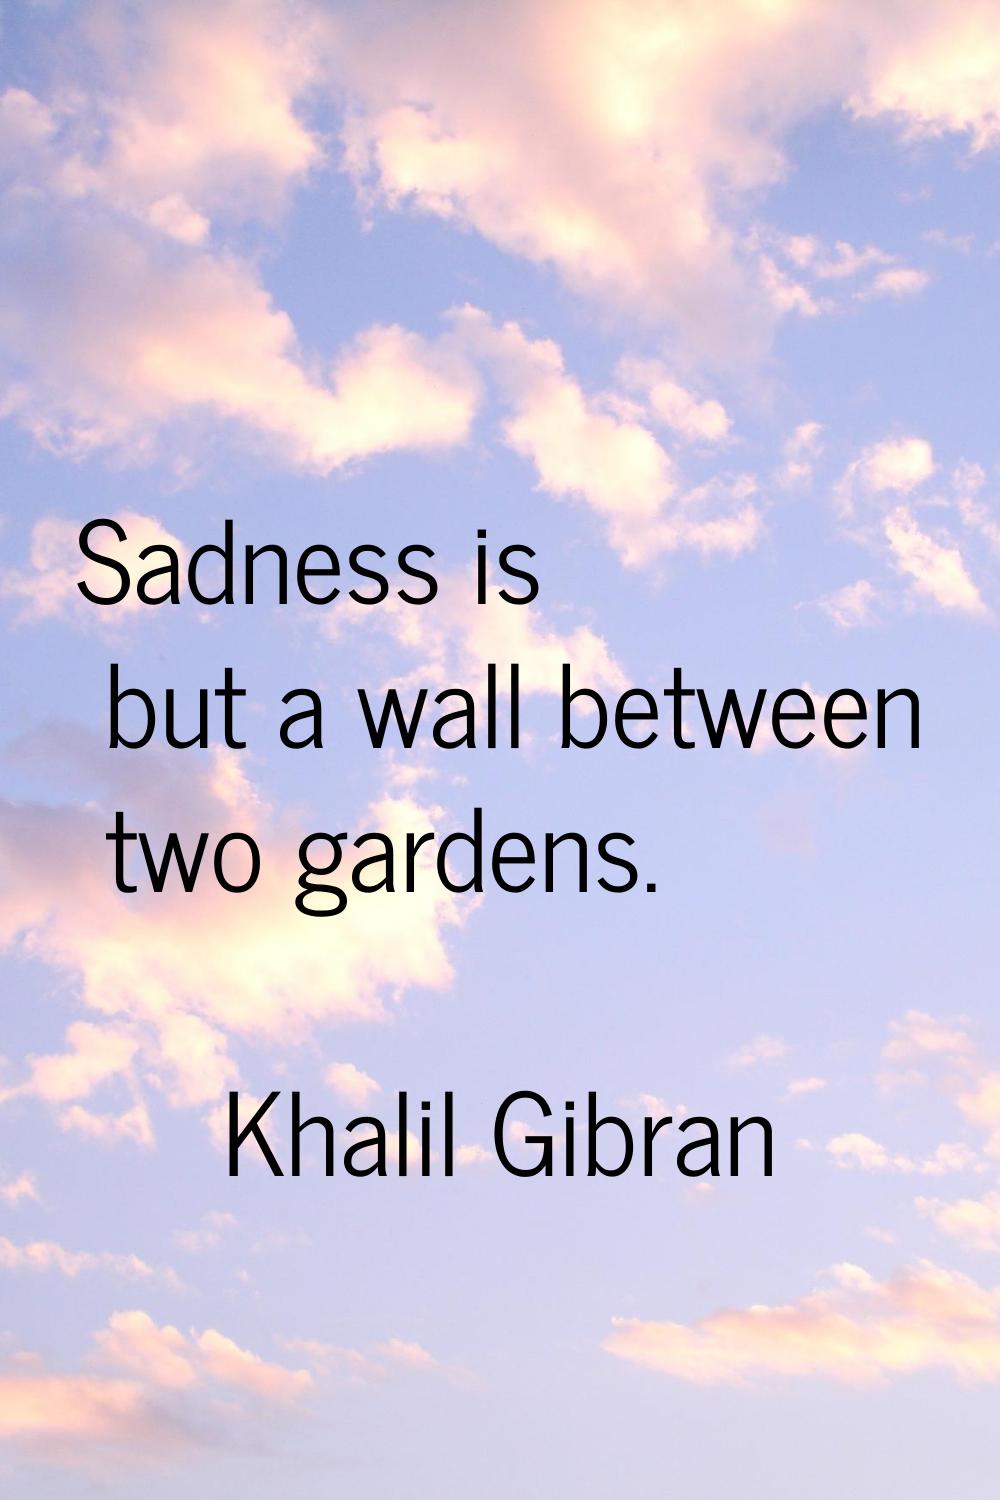 Sadness is but a wall between two gardens.